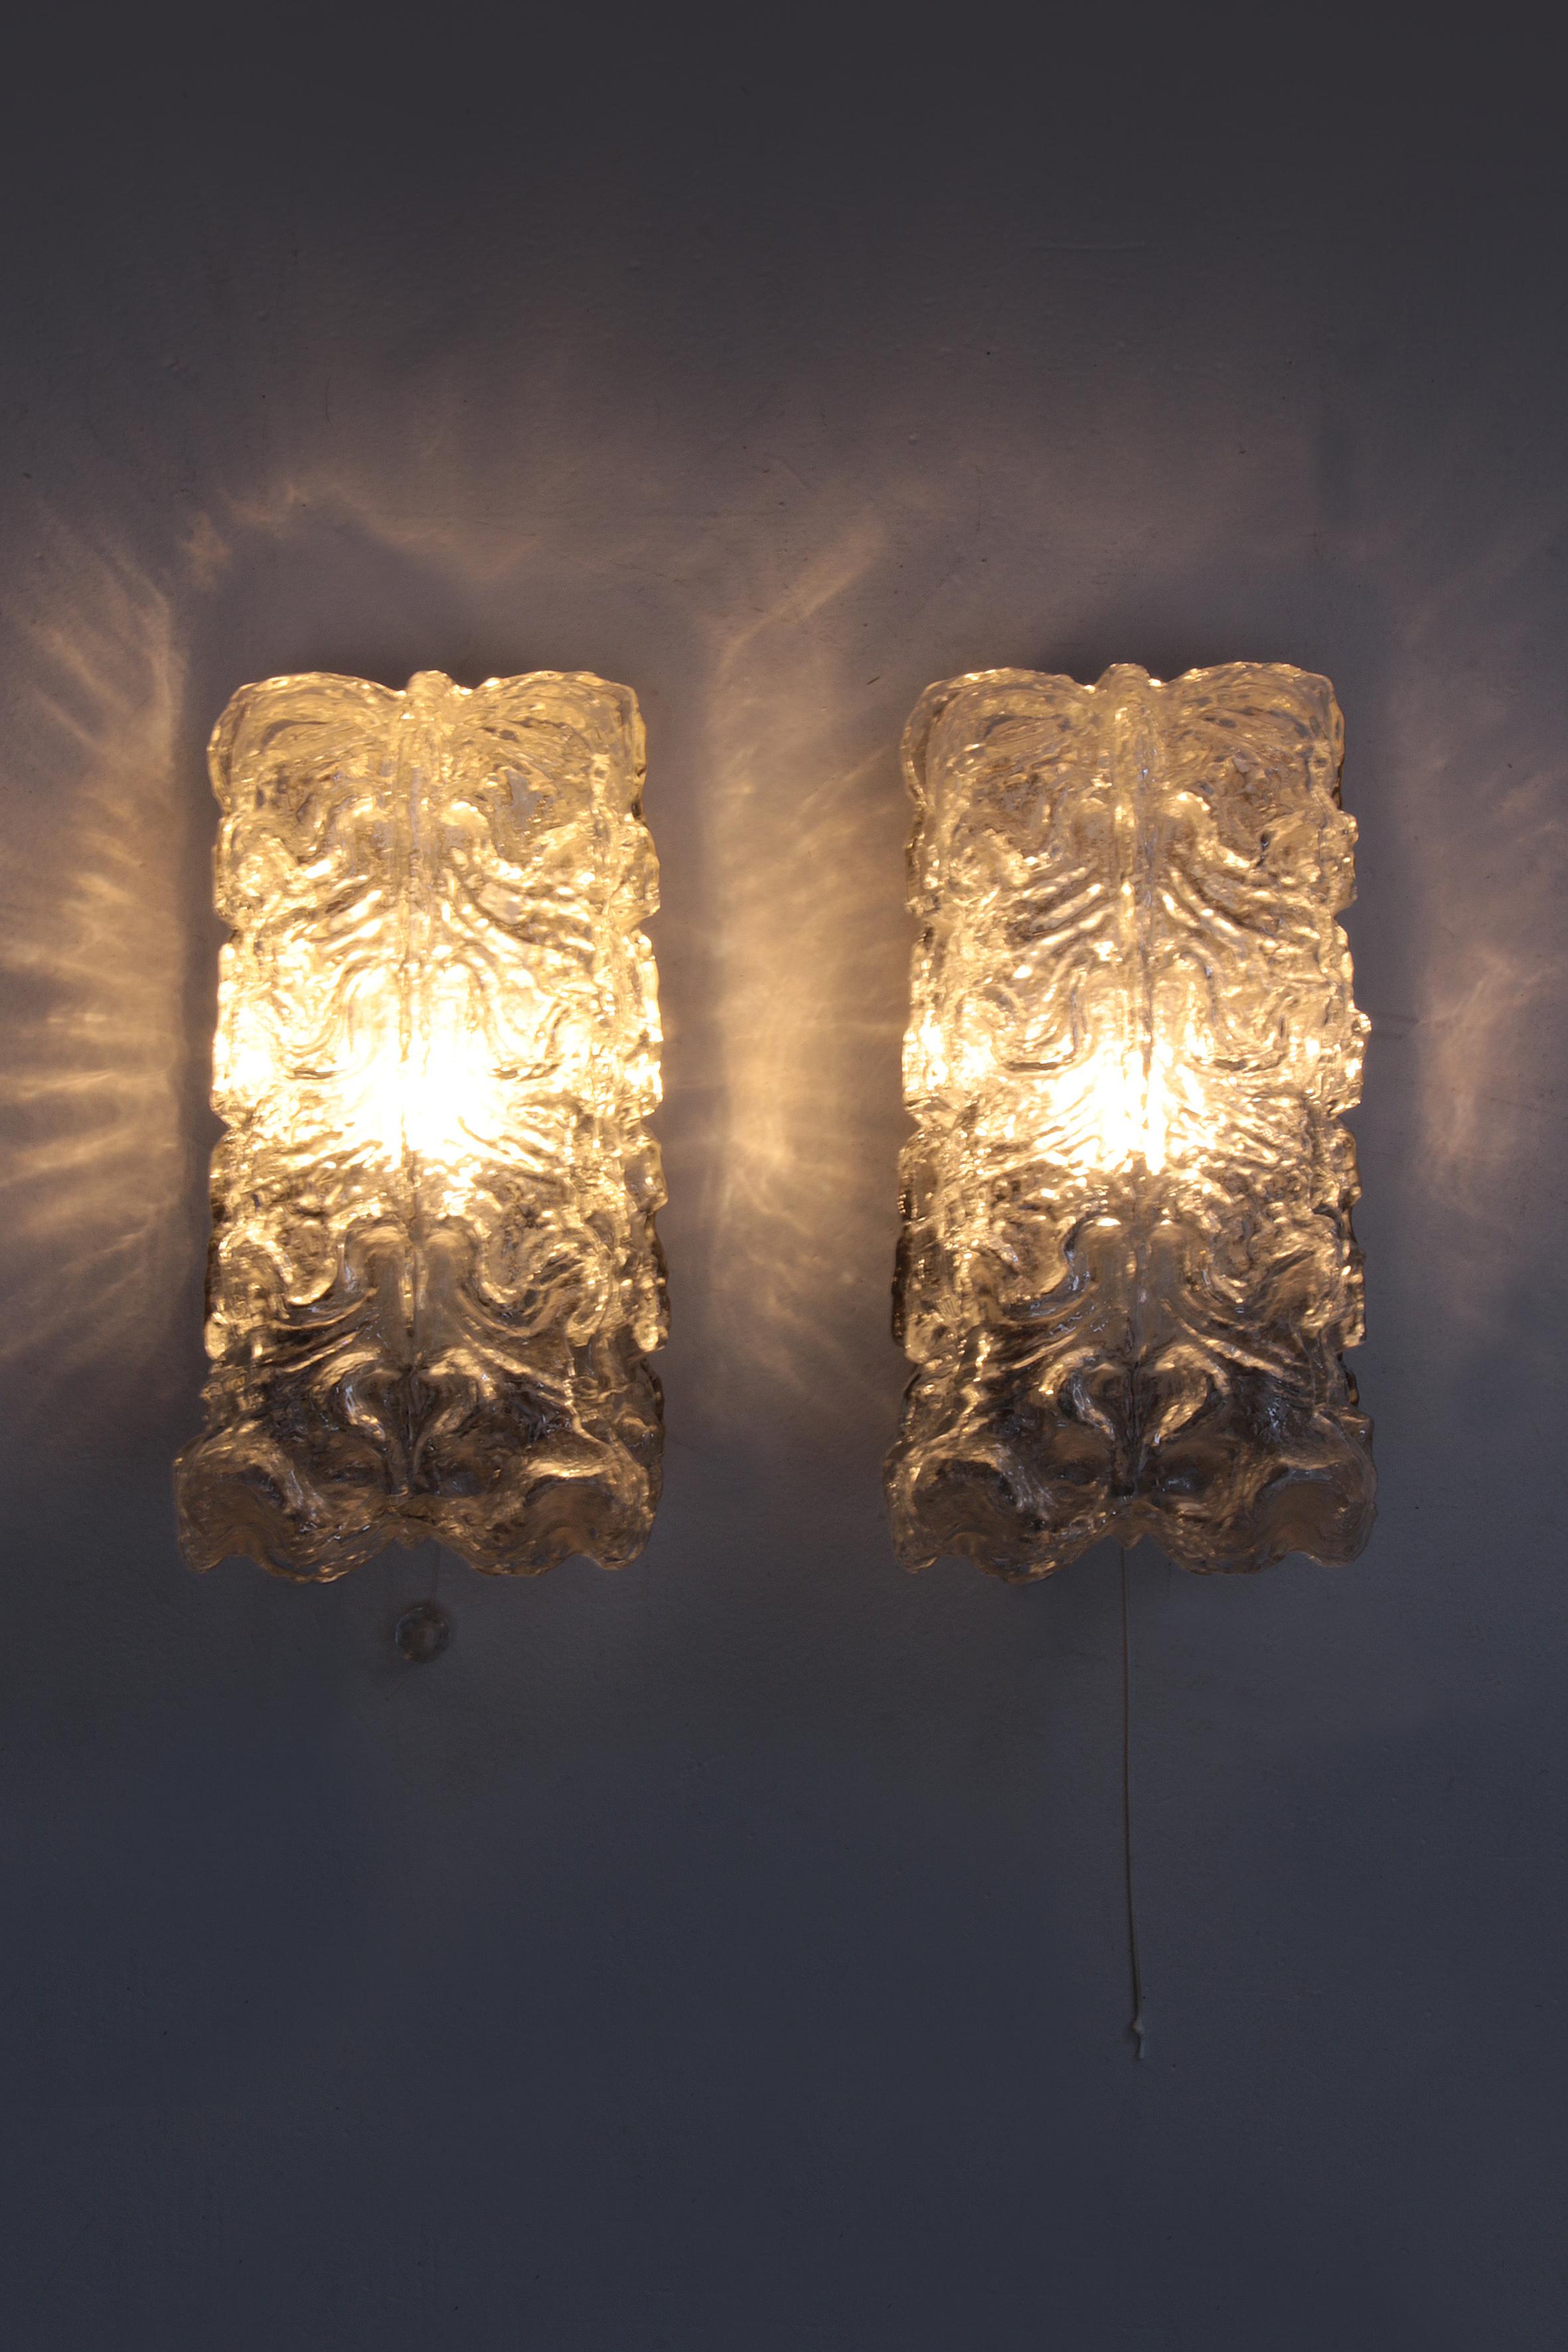 Pair of Glashutte Limburg Wall Lamps Made of Glass, 1960, Germany For Sale 1